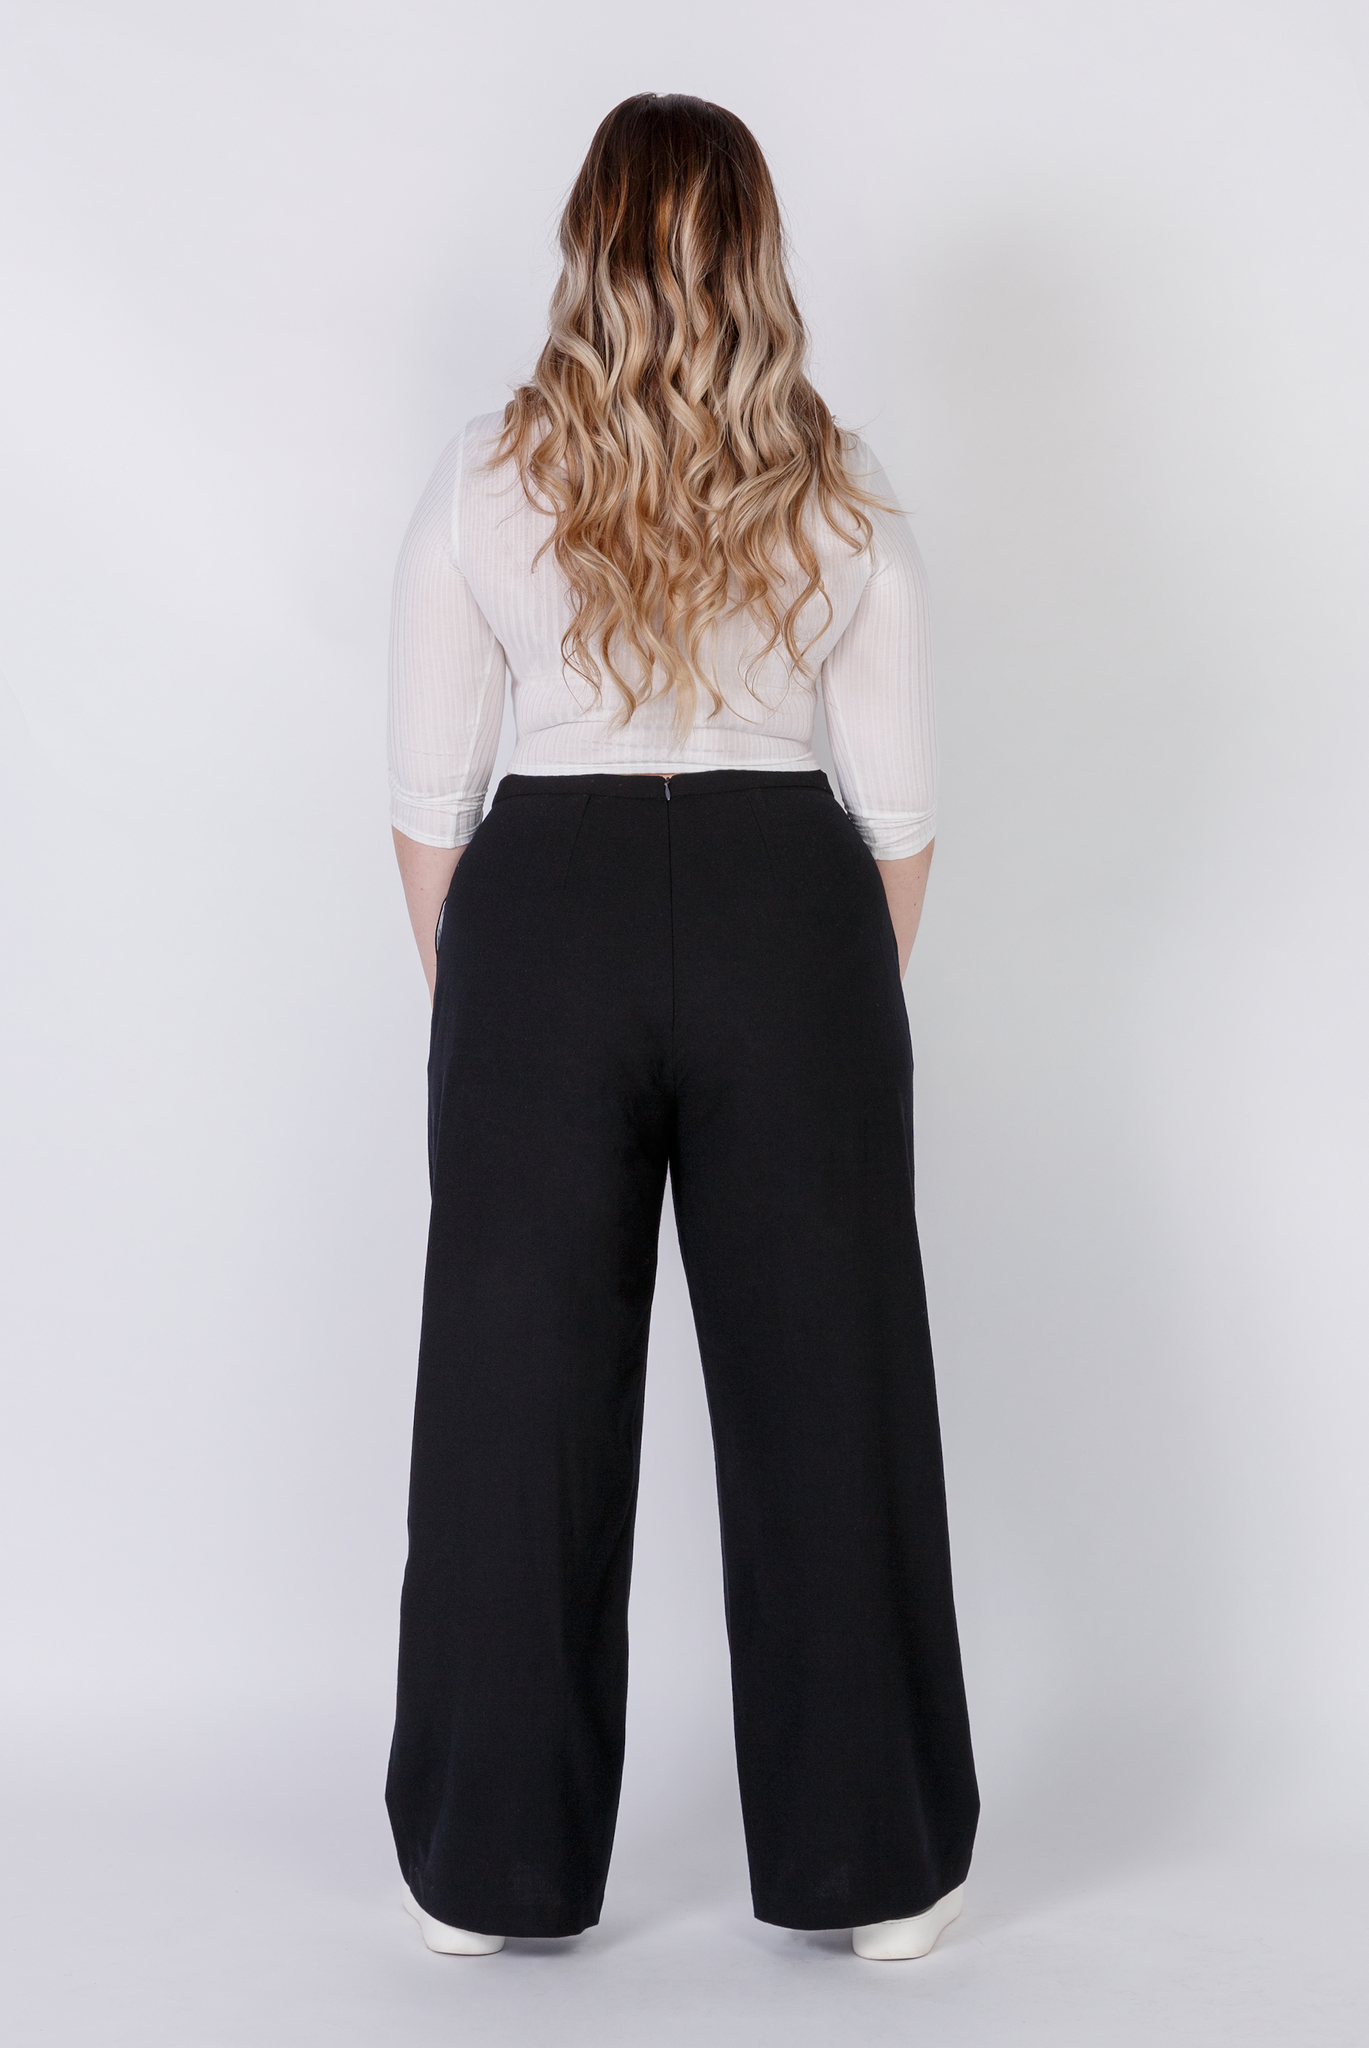 The Limited Edition Wool Wide Leg Pant by Aam is made for women with full hips and thighs. This is the back view of the pant, which shows the fit at the waist, hip and thigh. The pant comes in two colors - black (pictured here) and grey.